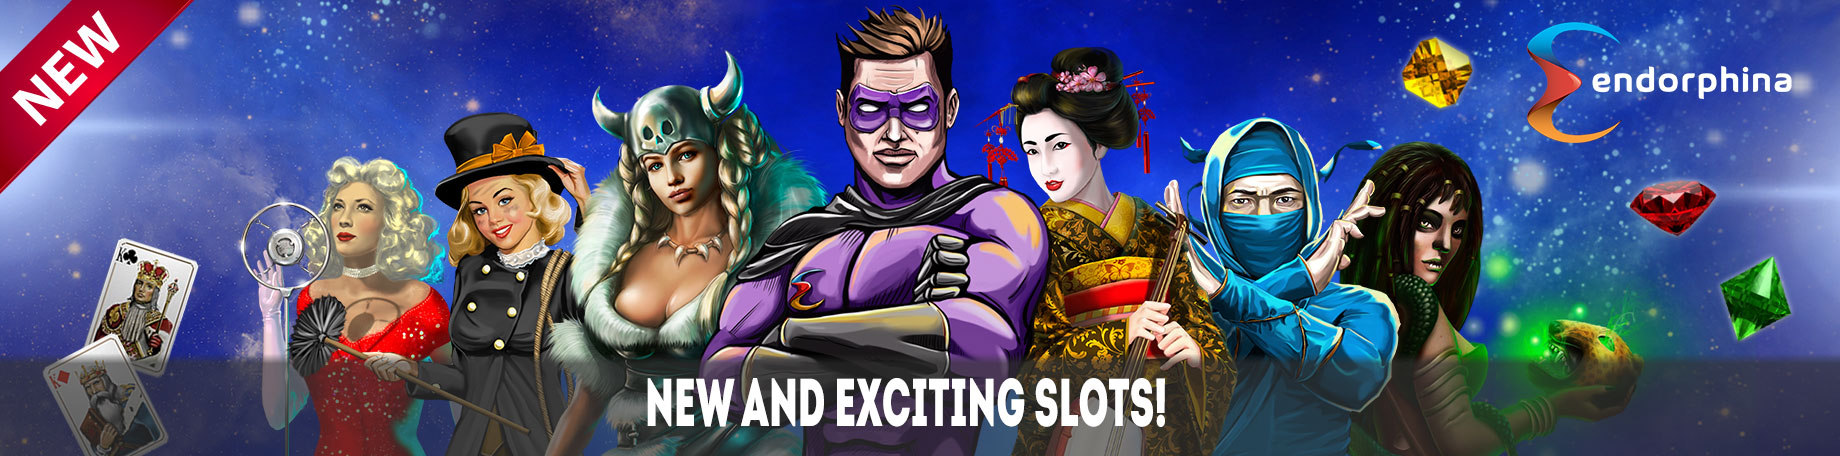 New Cuckoo Slot Now Available at All Endorphina Casinos